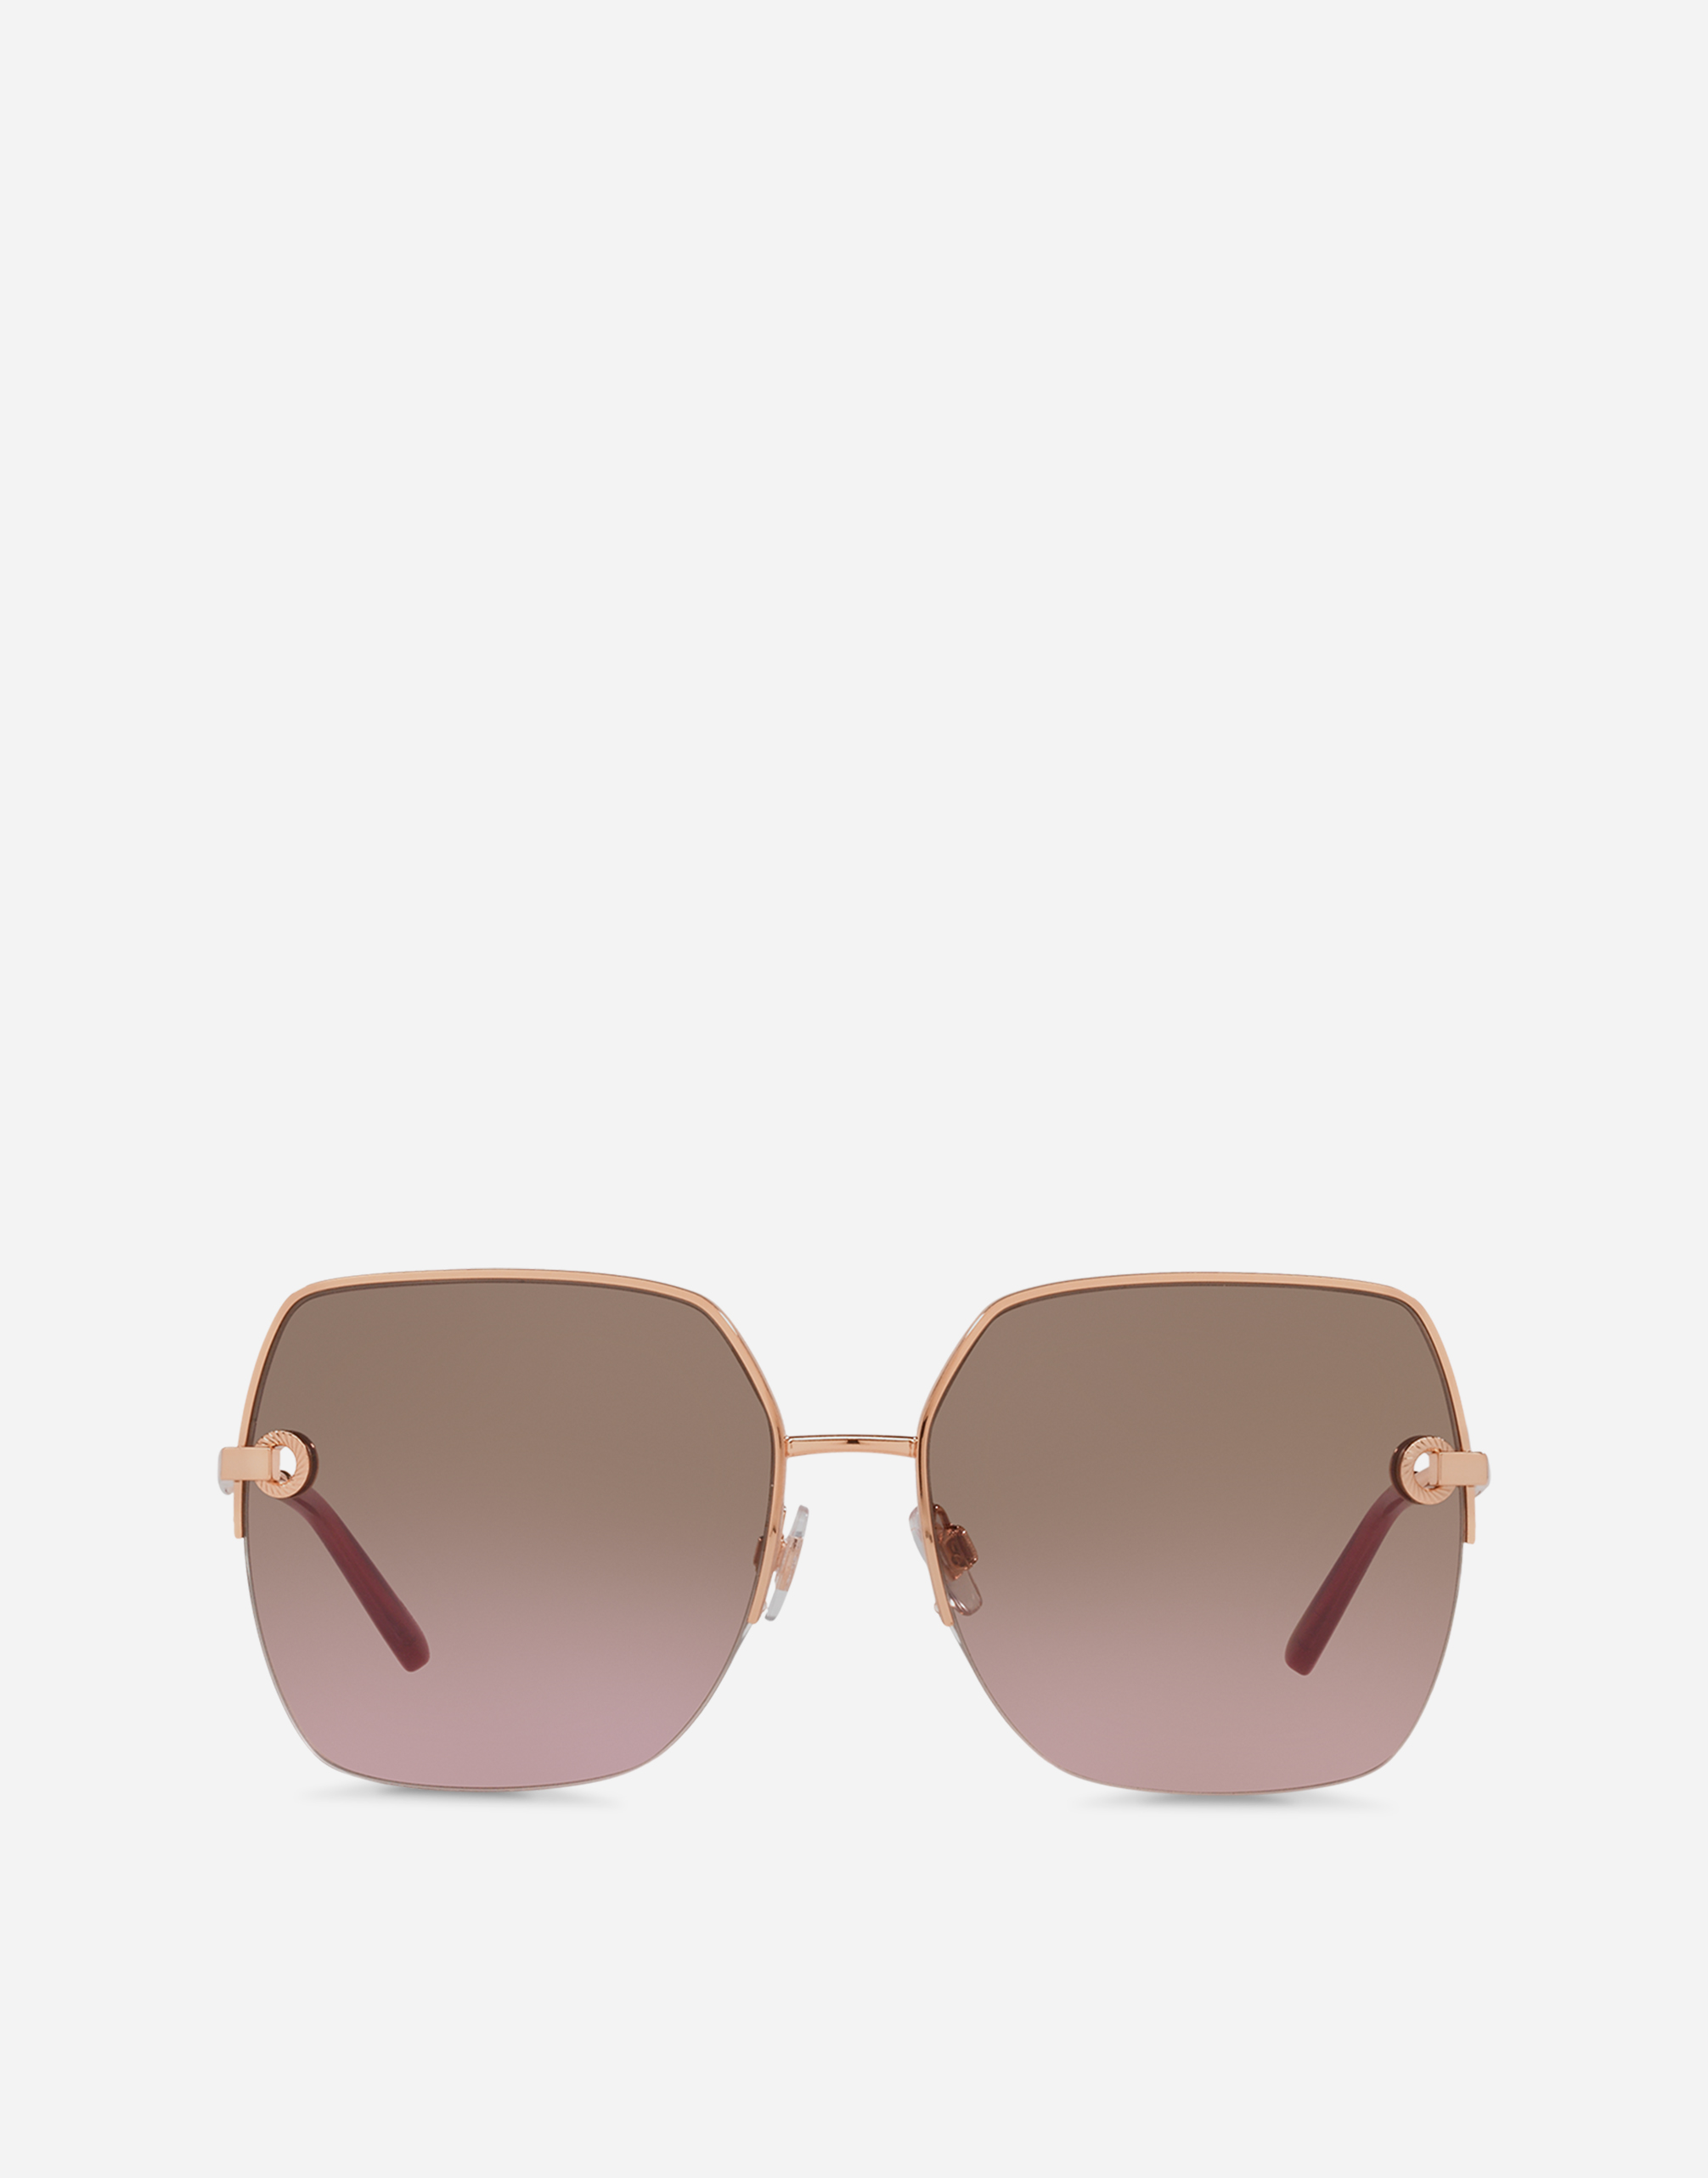 DG Amore sunglasses  in Pink Gold